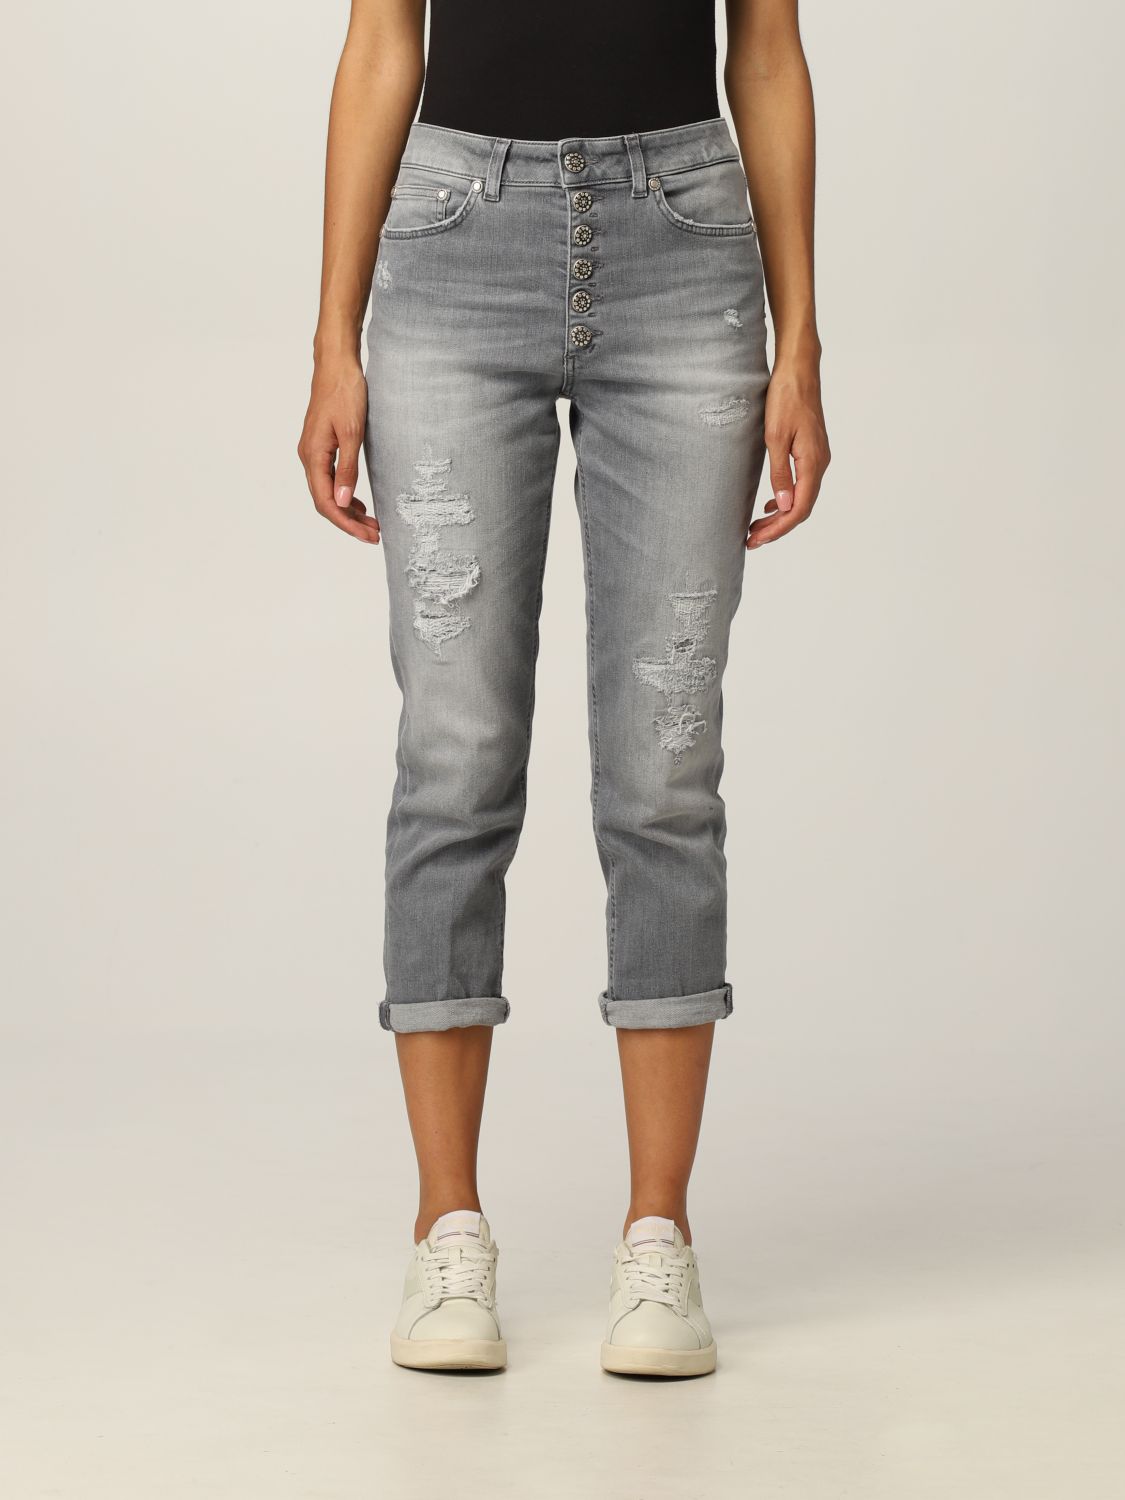 DONDUP: women | Jeans Dondup Grey | Jeans Dondup GIGLIO.COM